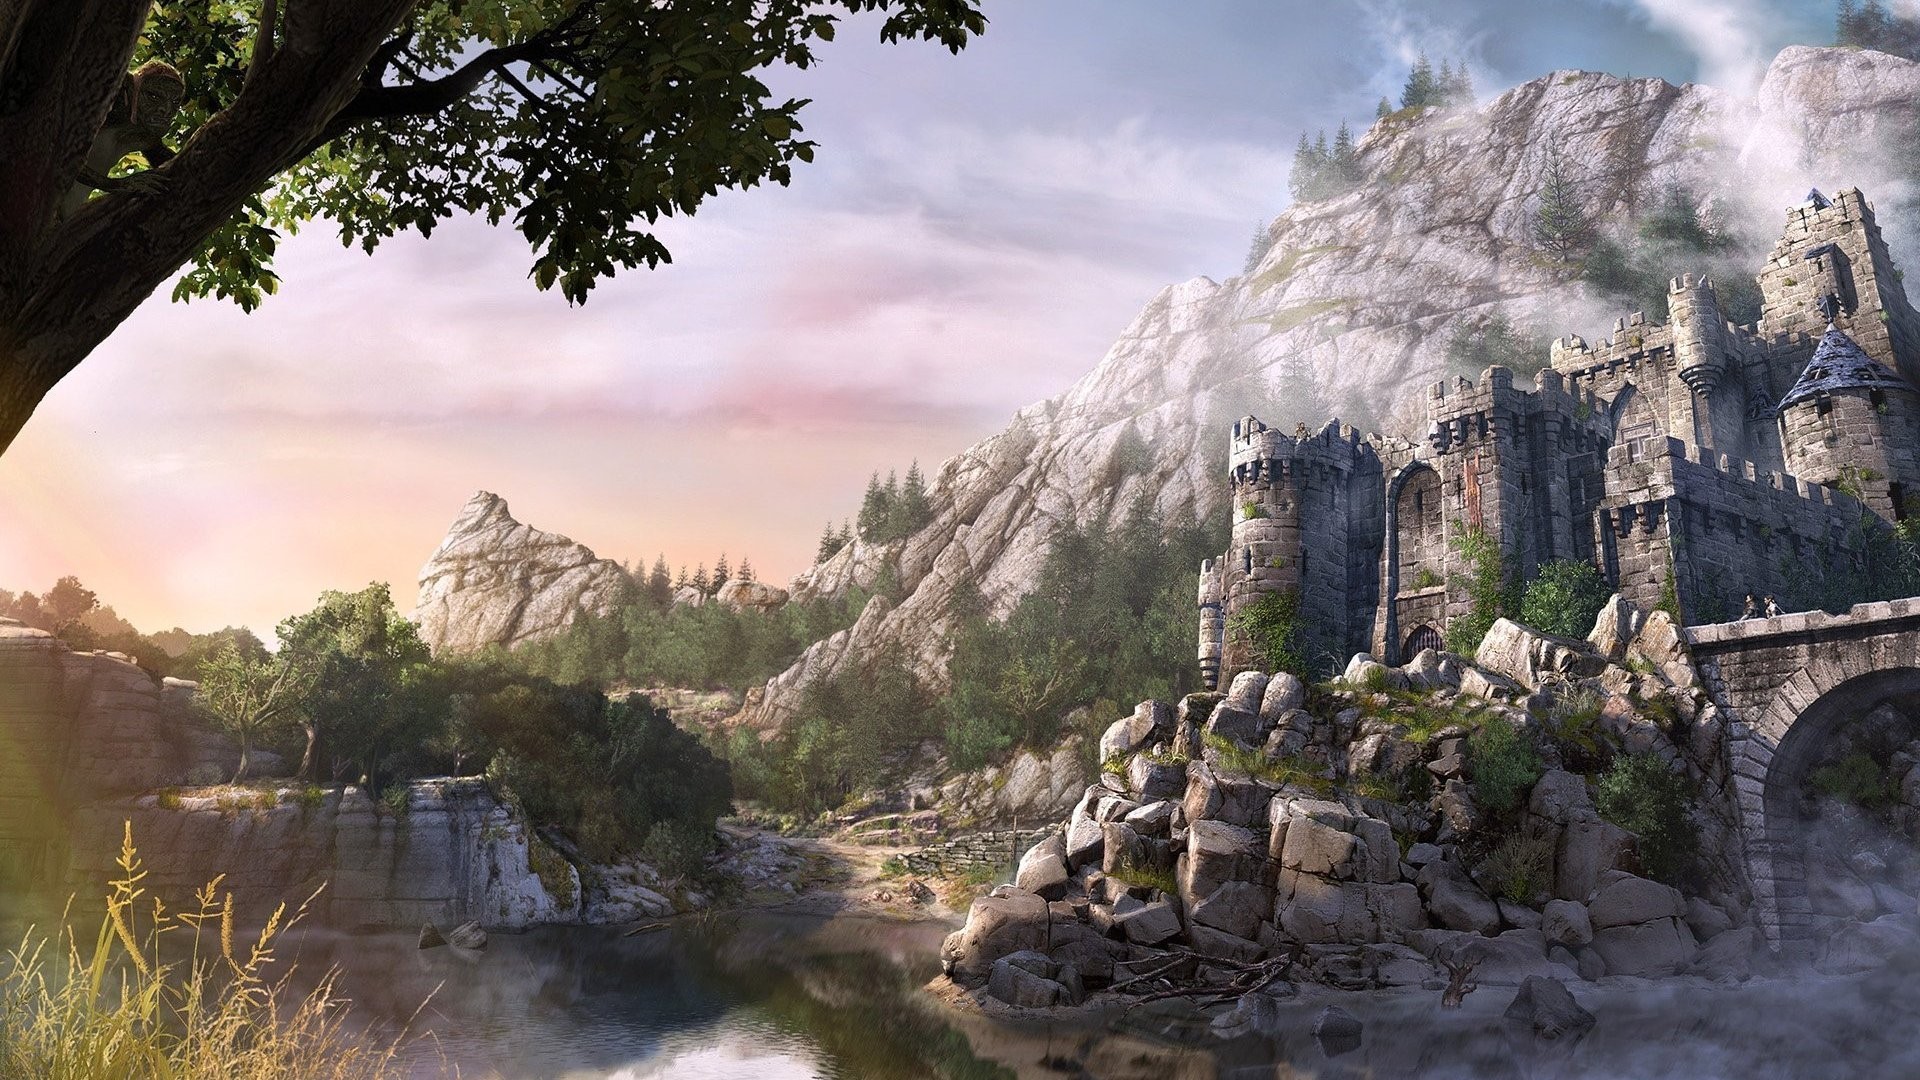 Ruins in the Mountain desktop wallpaper from Arcania: Gothic 4 video game.